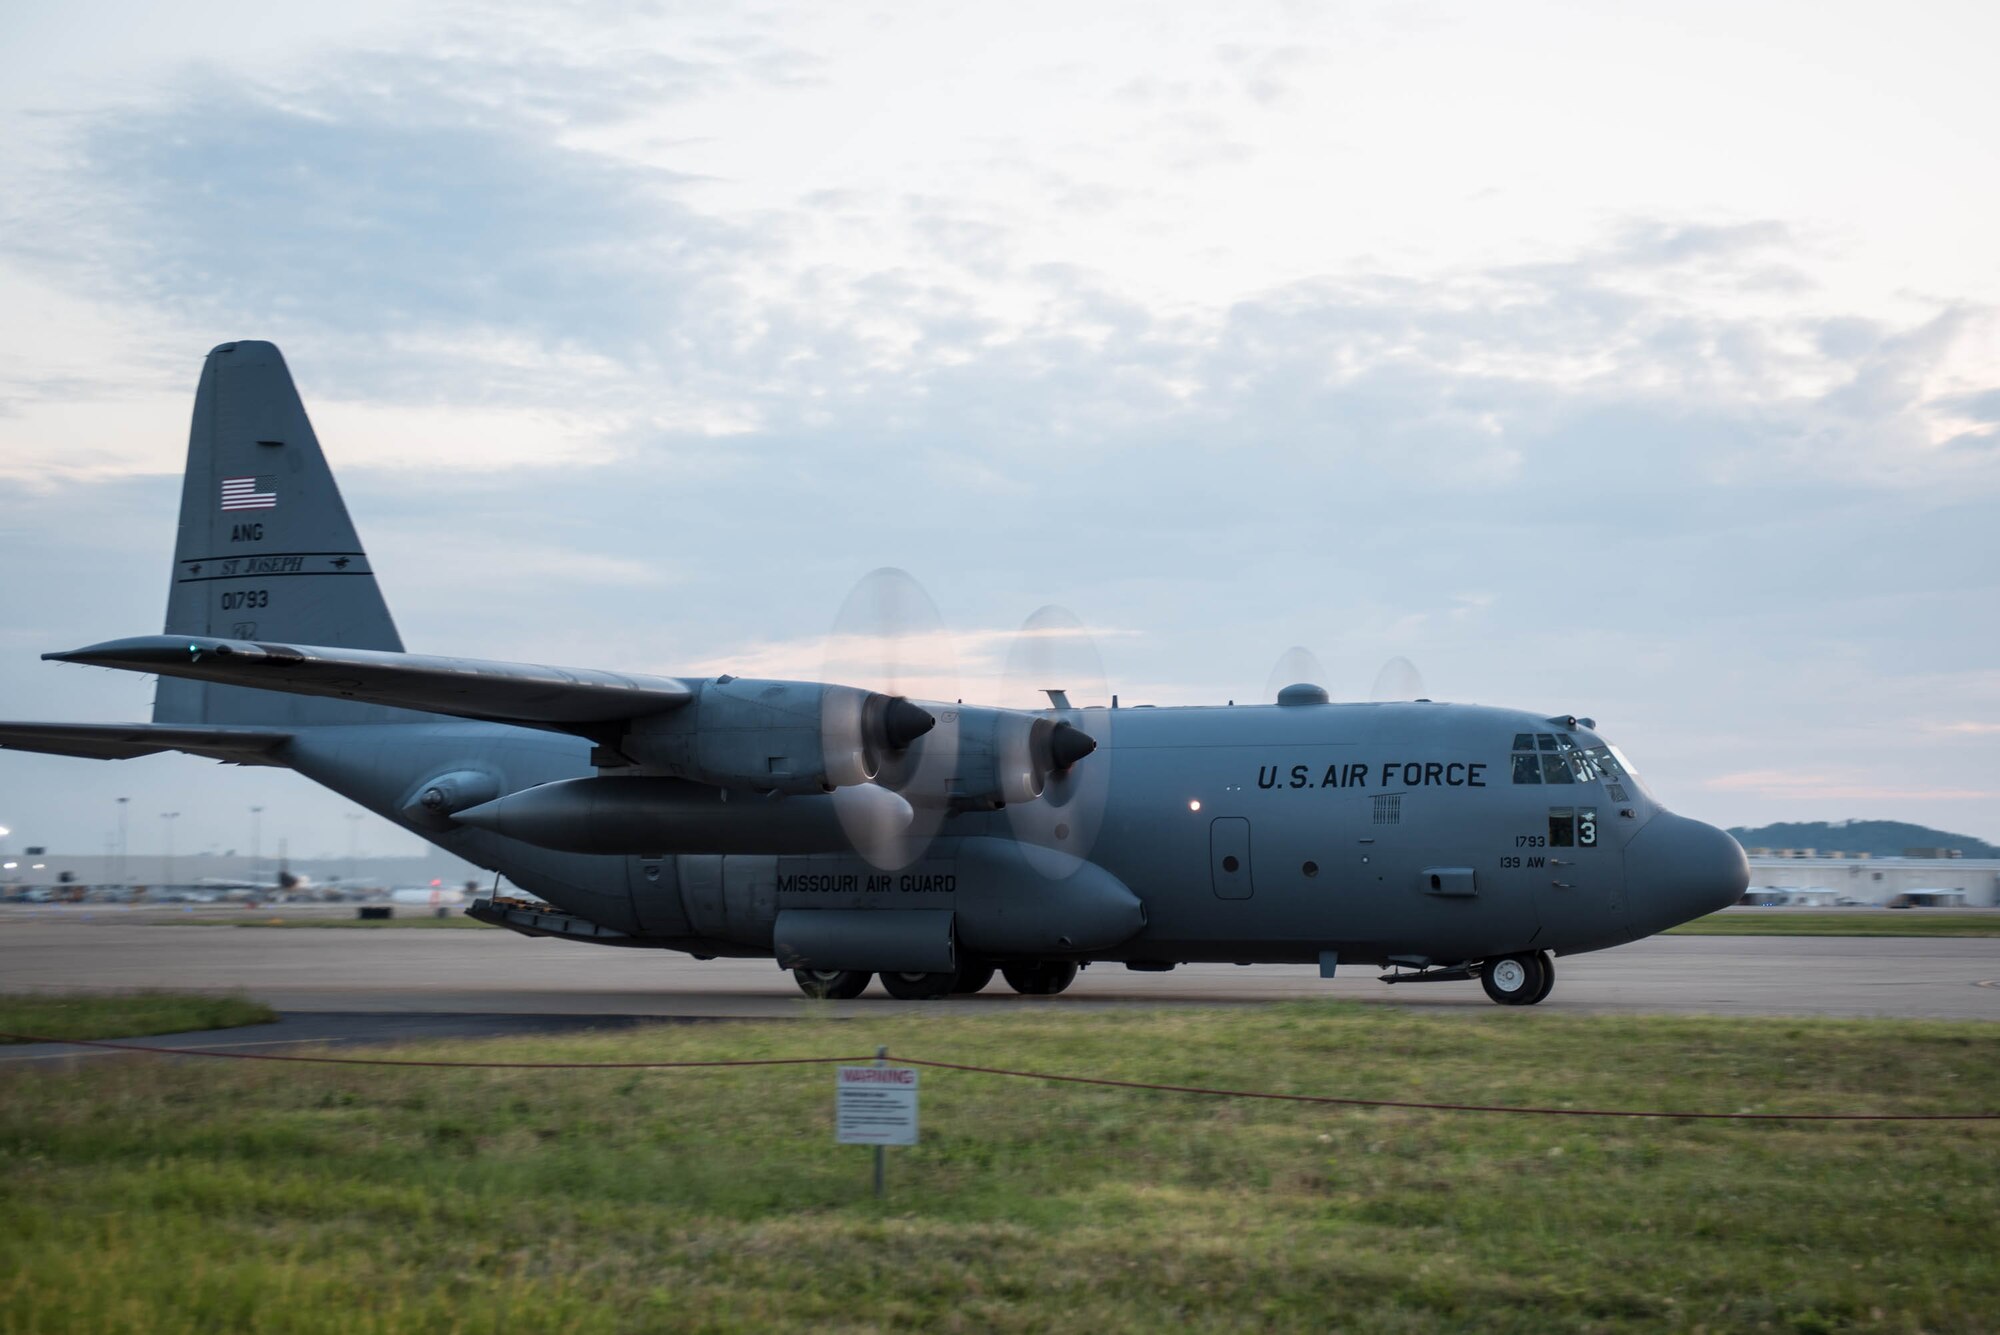 Kentucky Air Guard mobilizes in support of Hurricane Harvey relief